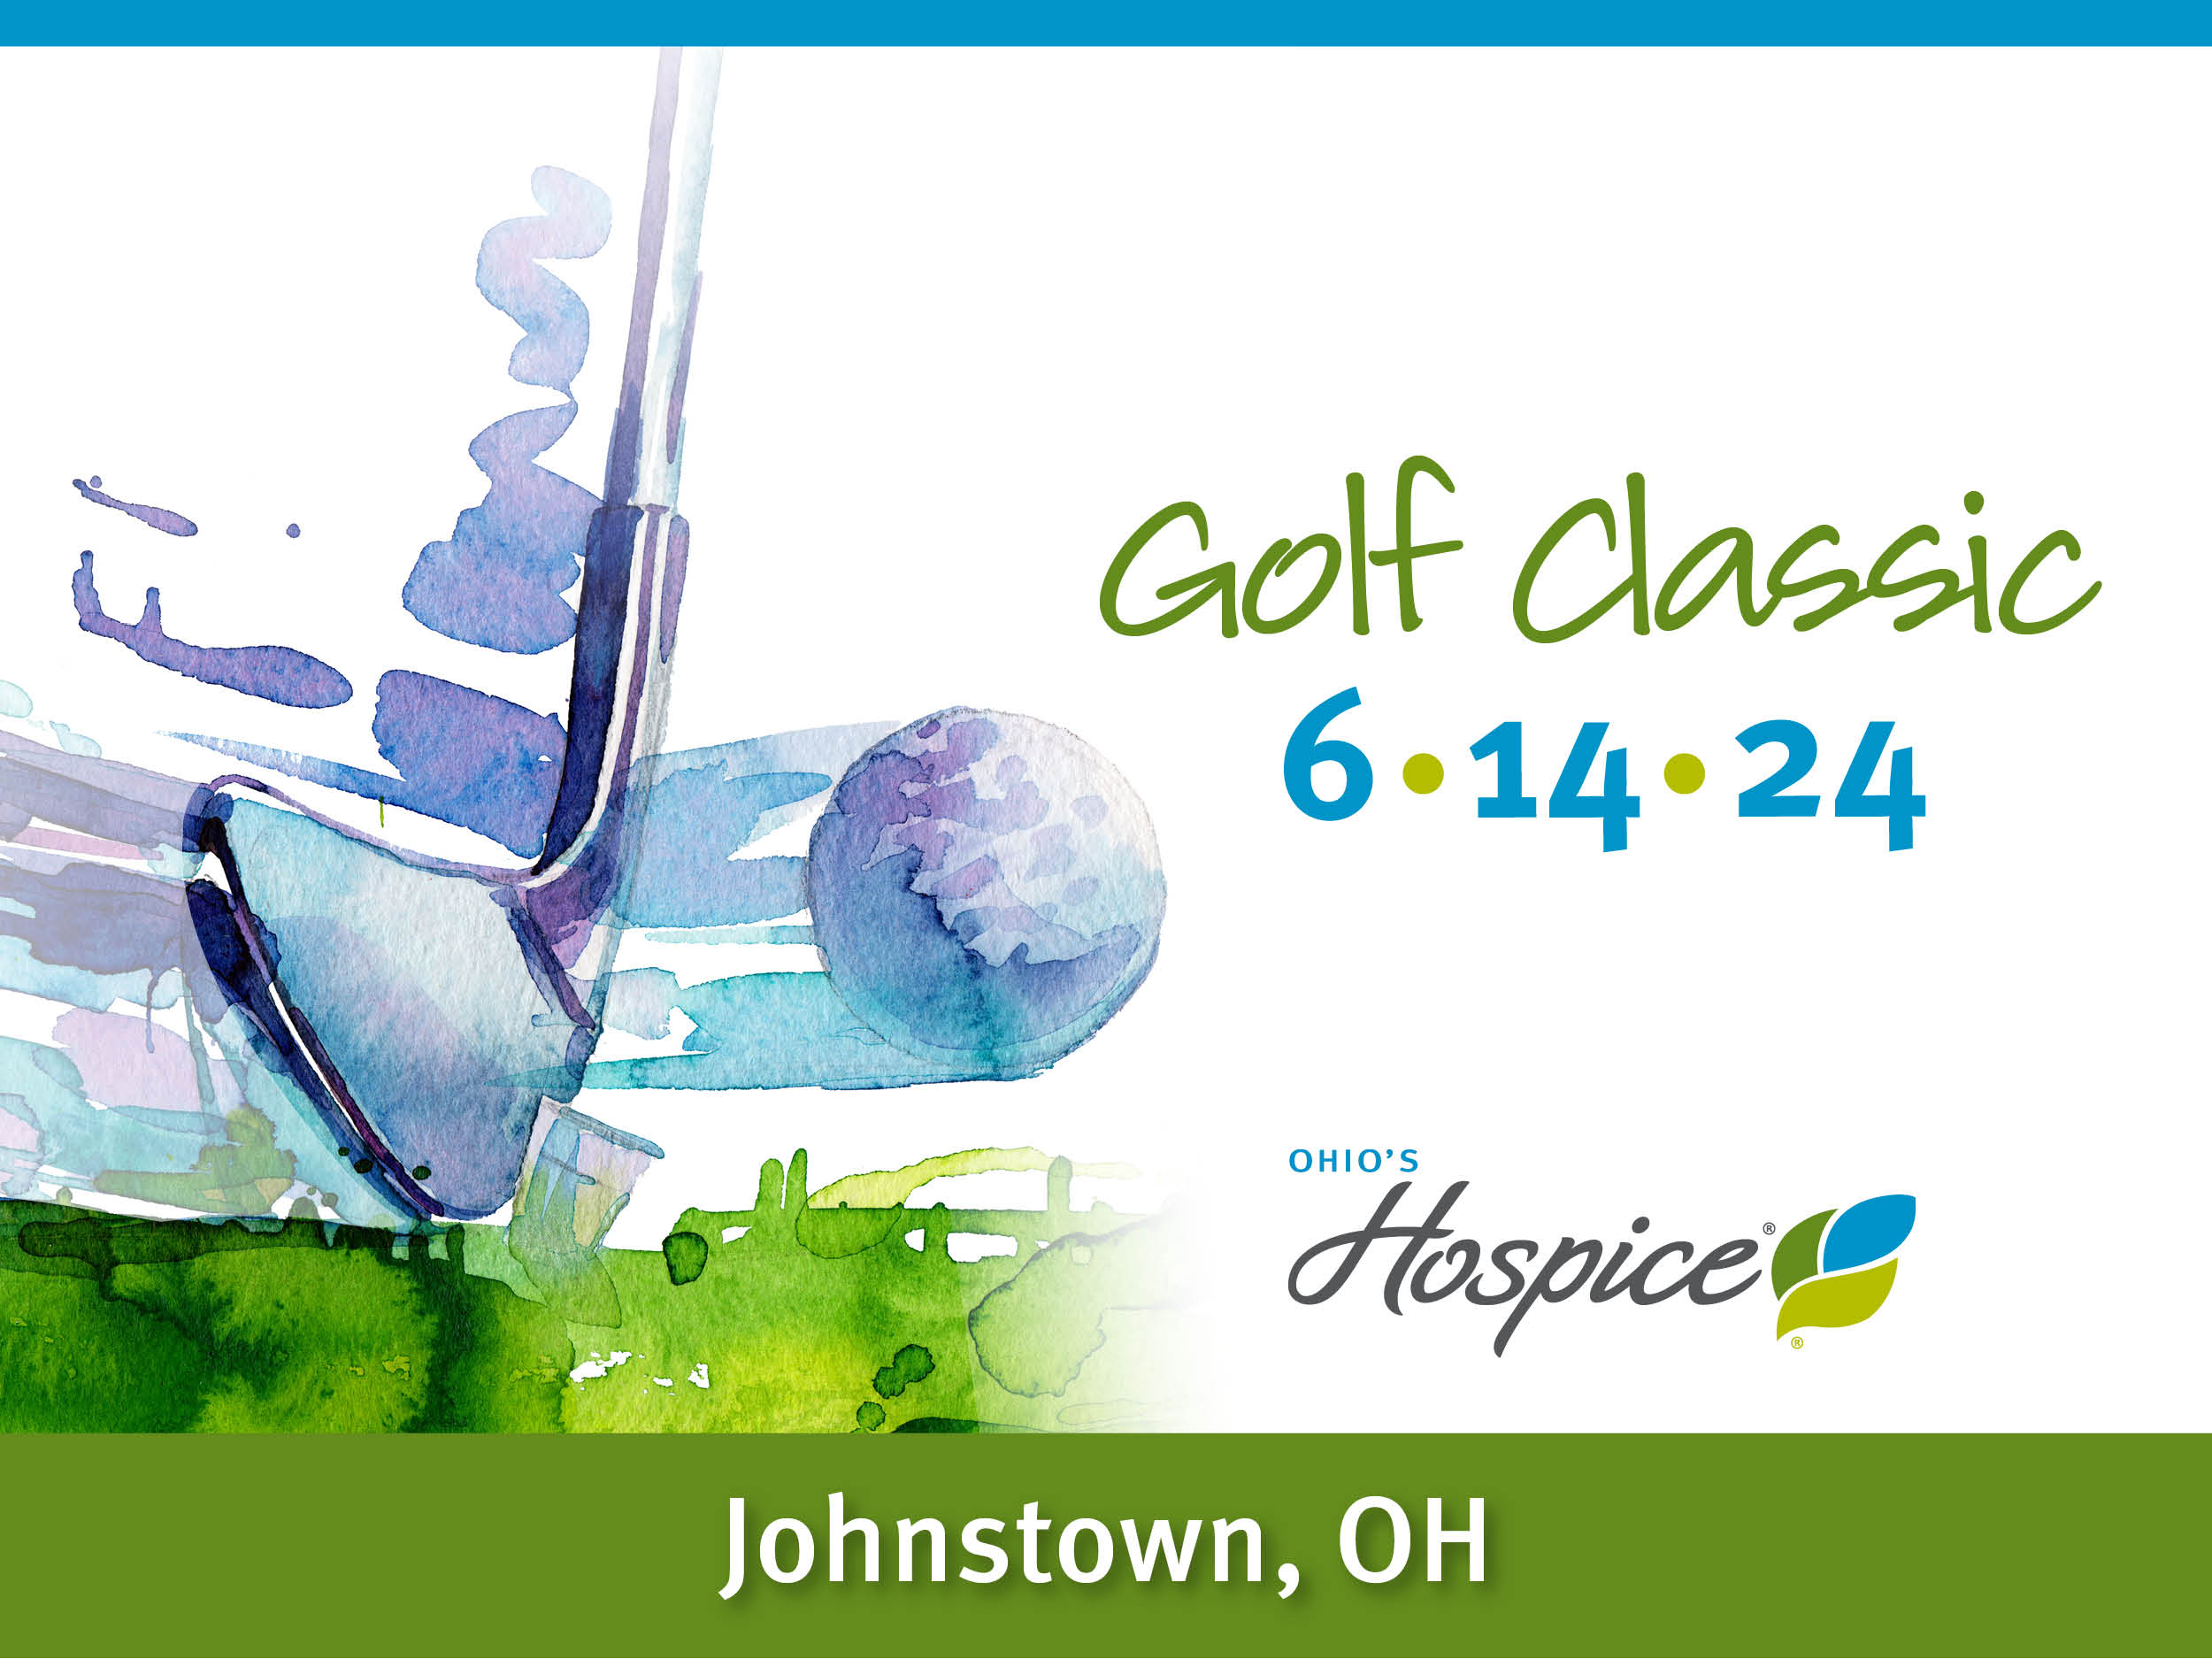 Golf Classic 6.14.24 Johnstown, OH